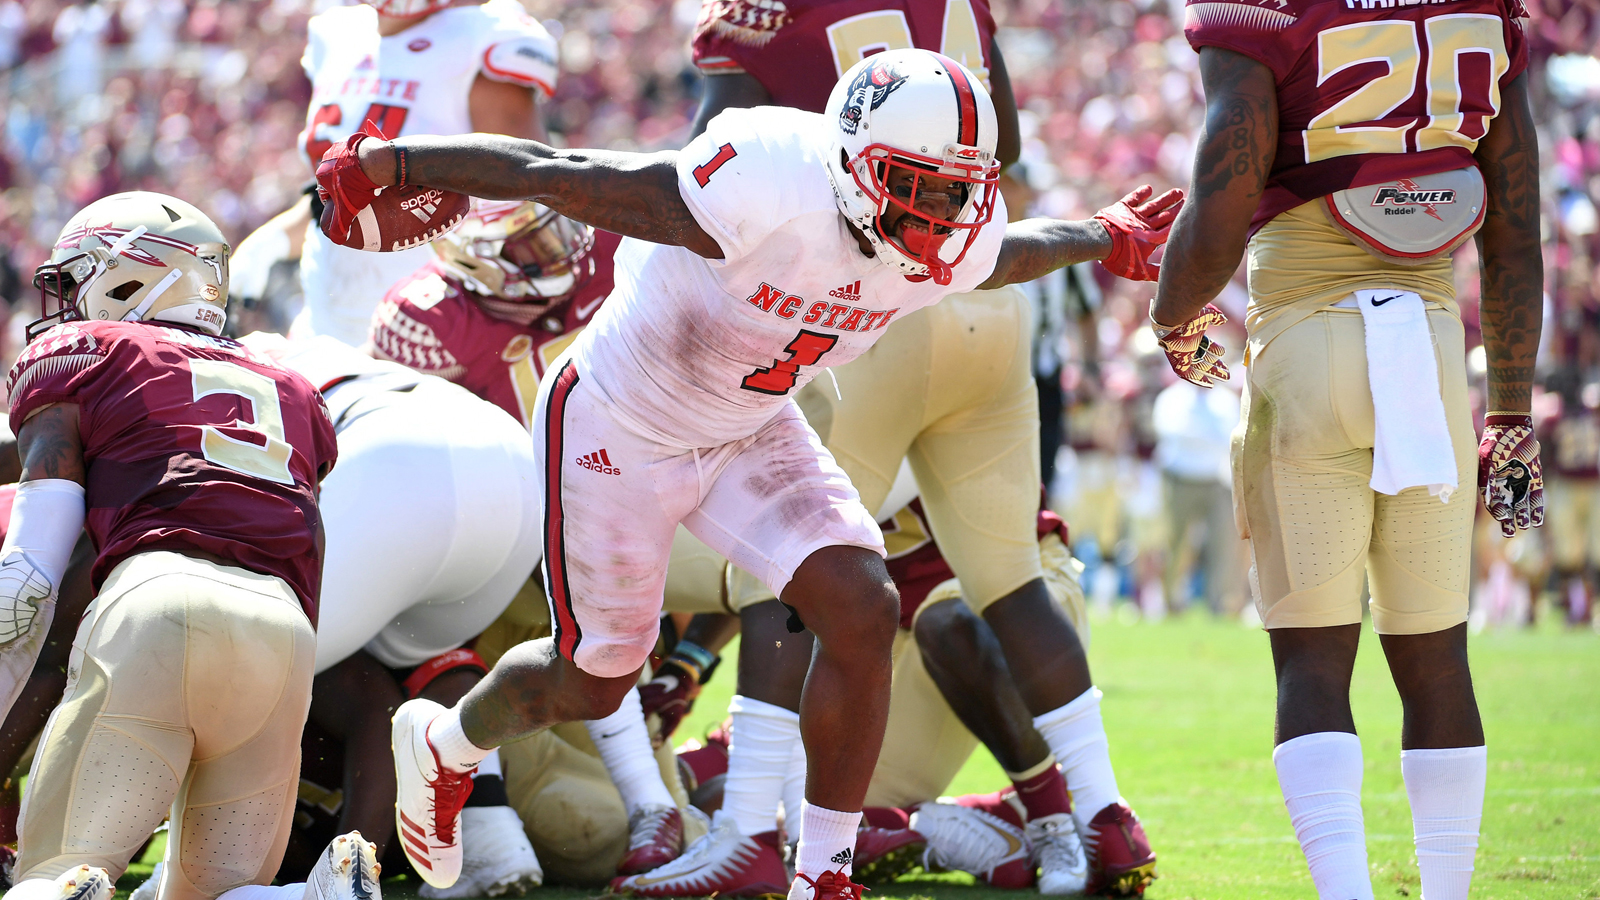 Rough start: FSU upset at home by NC State, falls to 0-2 to begin season